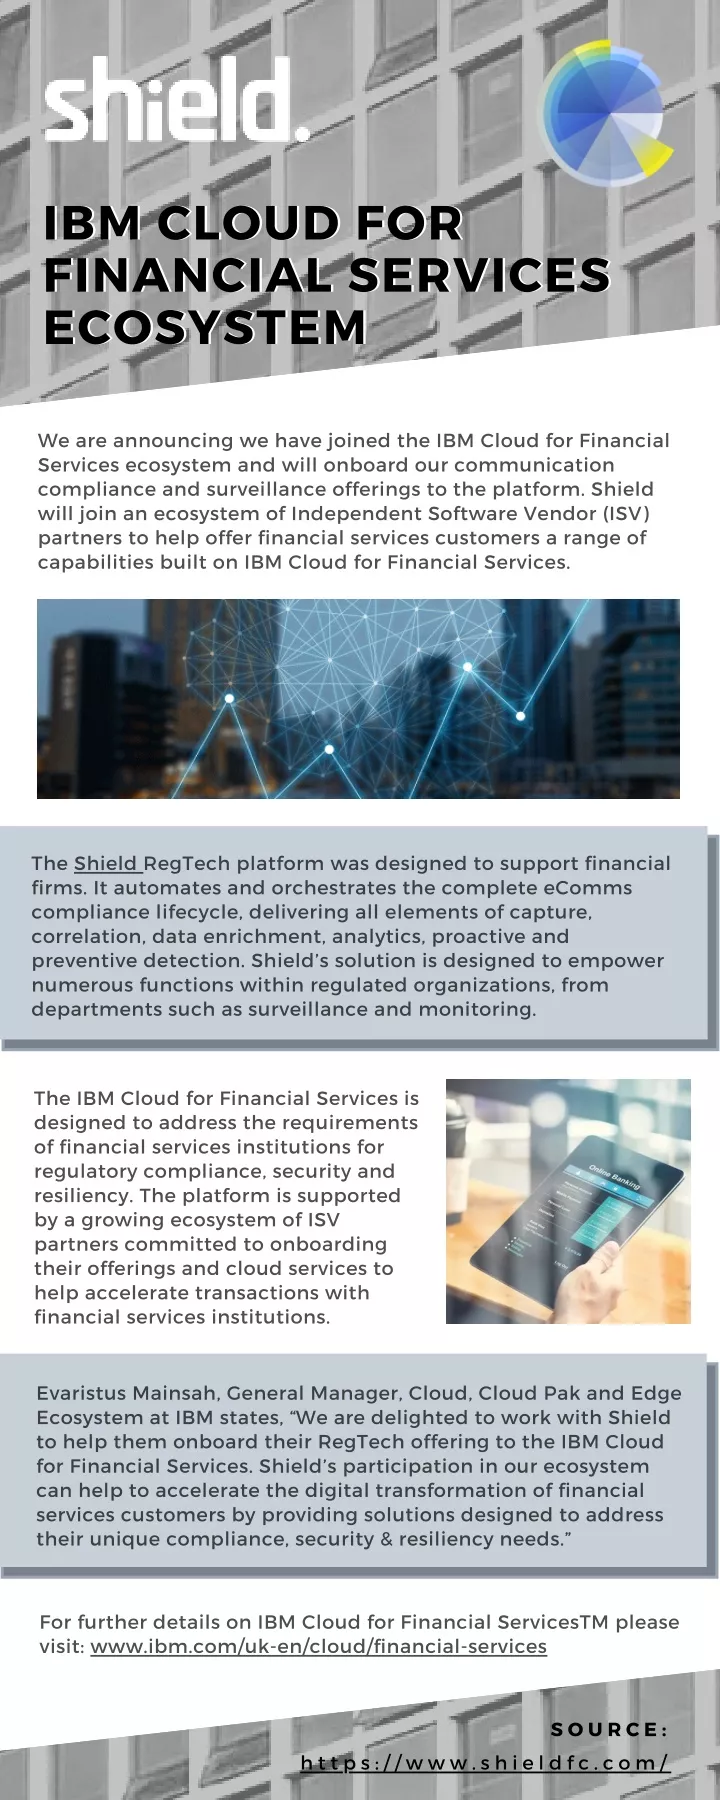 ibm cloud for financial services ecosystem